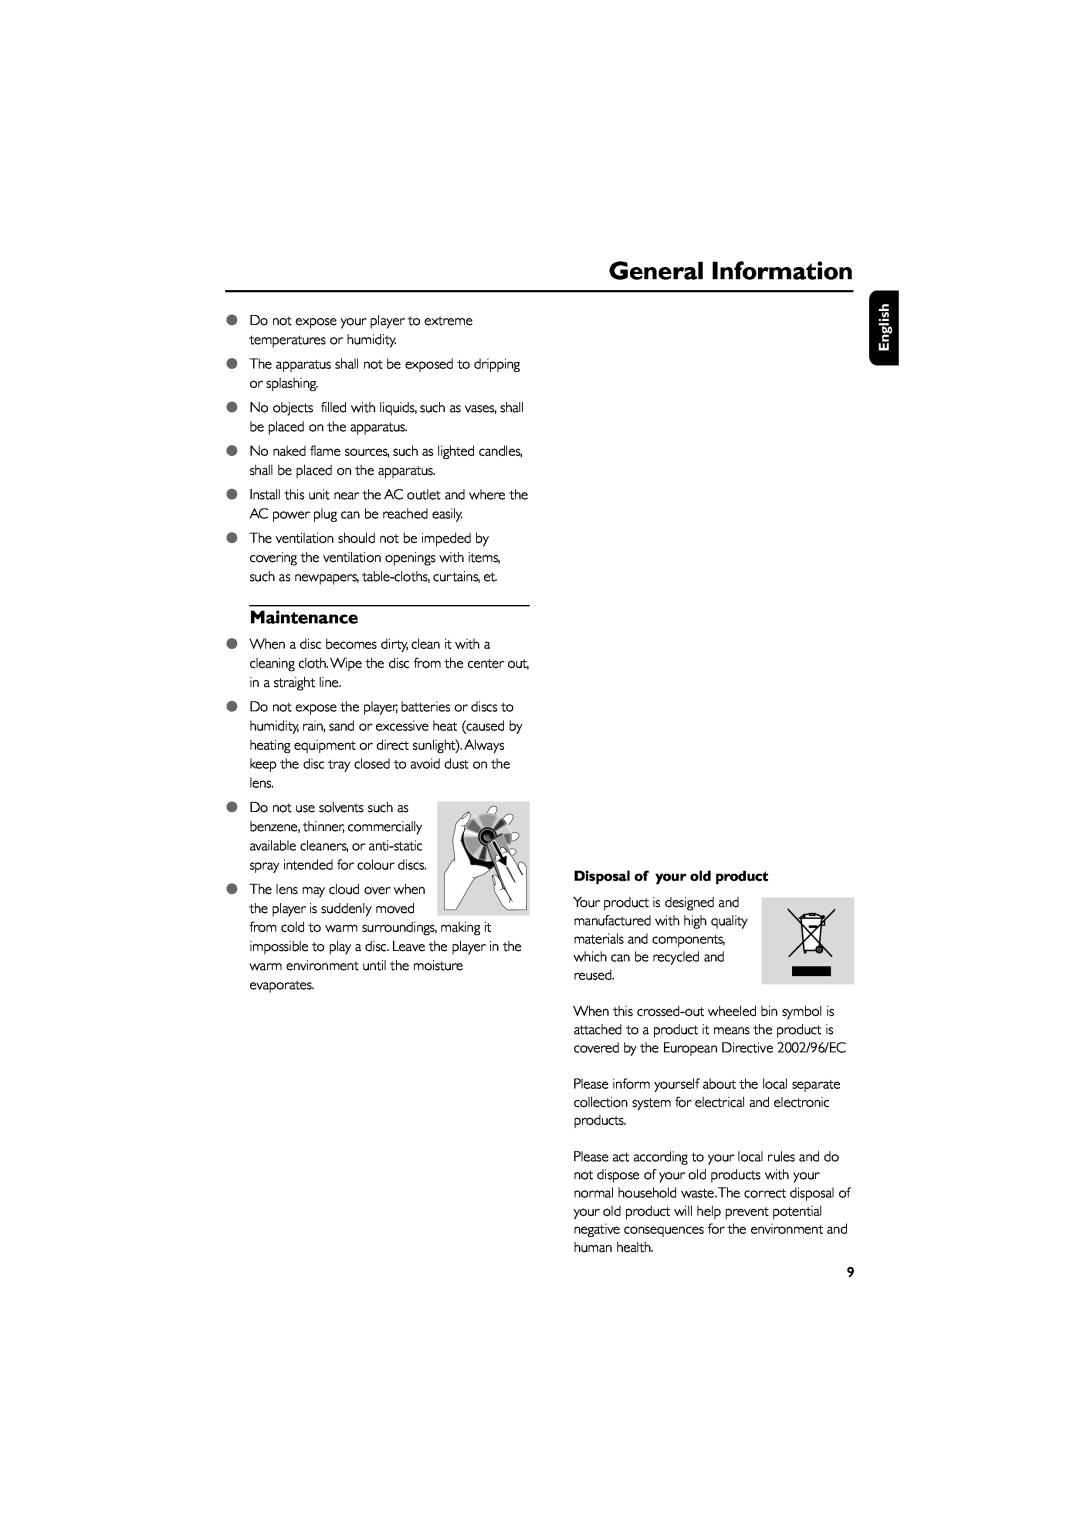 Philips MCD709 user manual Maintenance, Disposal of your old product, General Information, English 